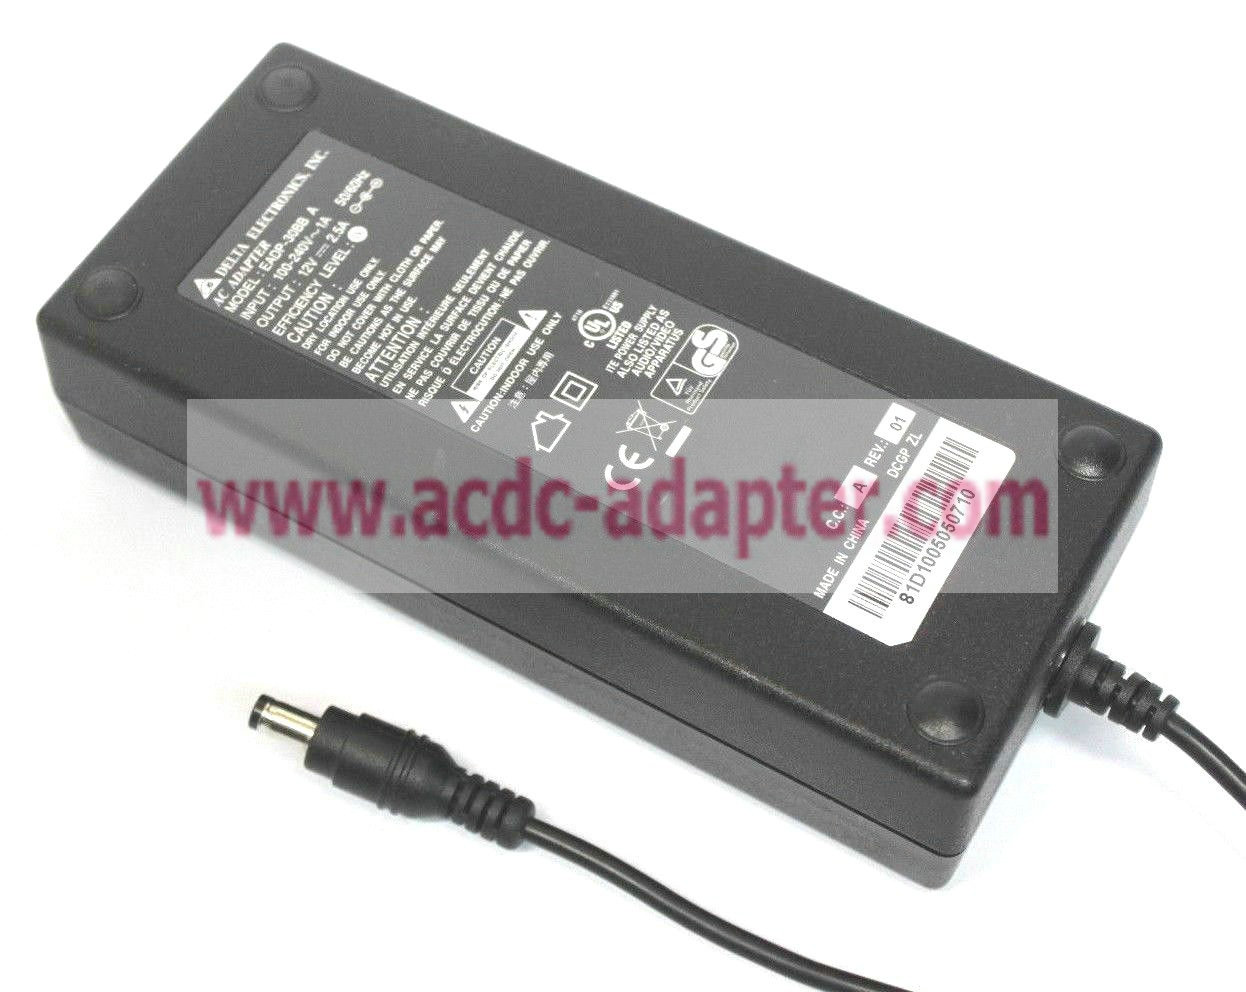 New 12V DC 2.5A Delta EADP-30BB-A Power Supply AC Adapter Charger 2500mA